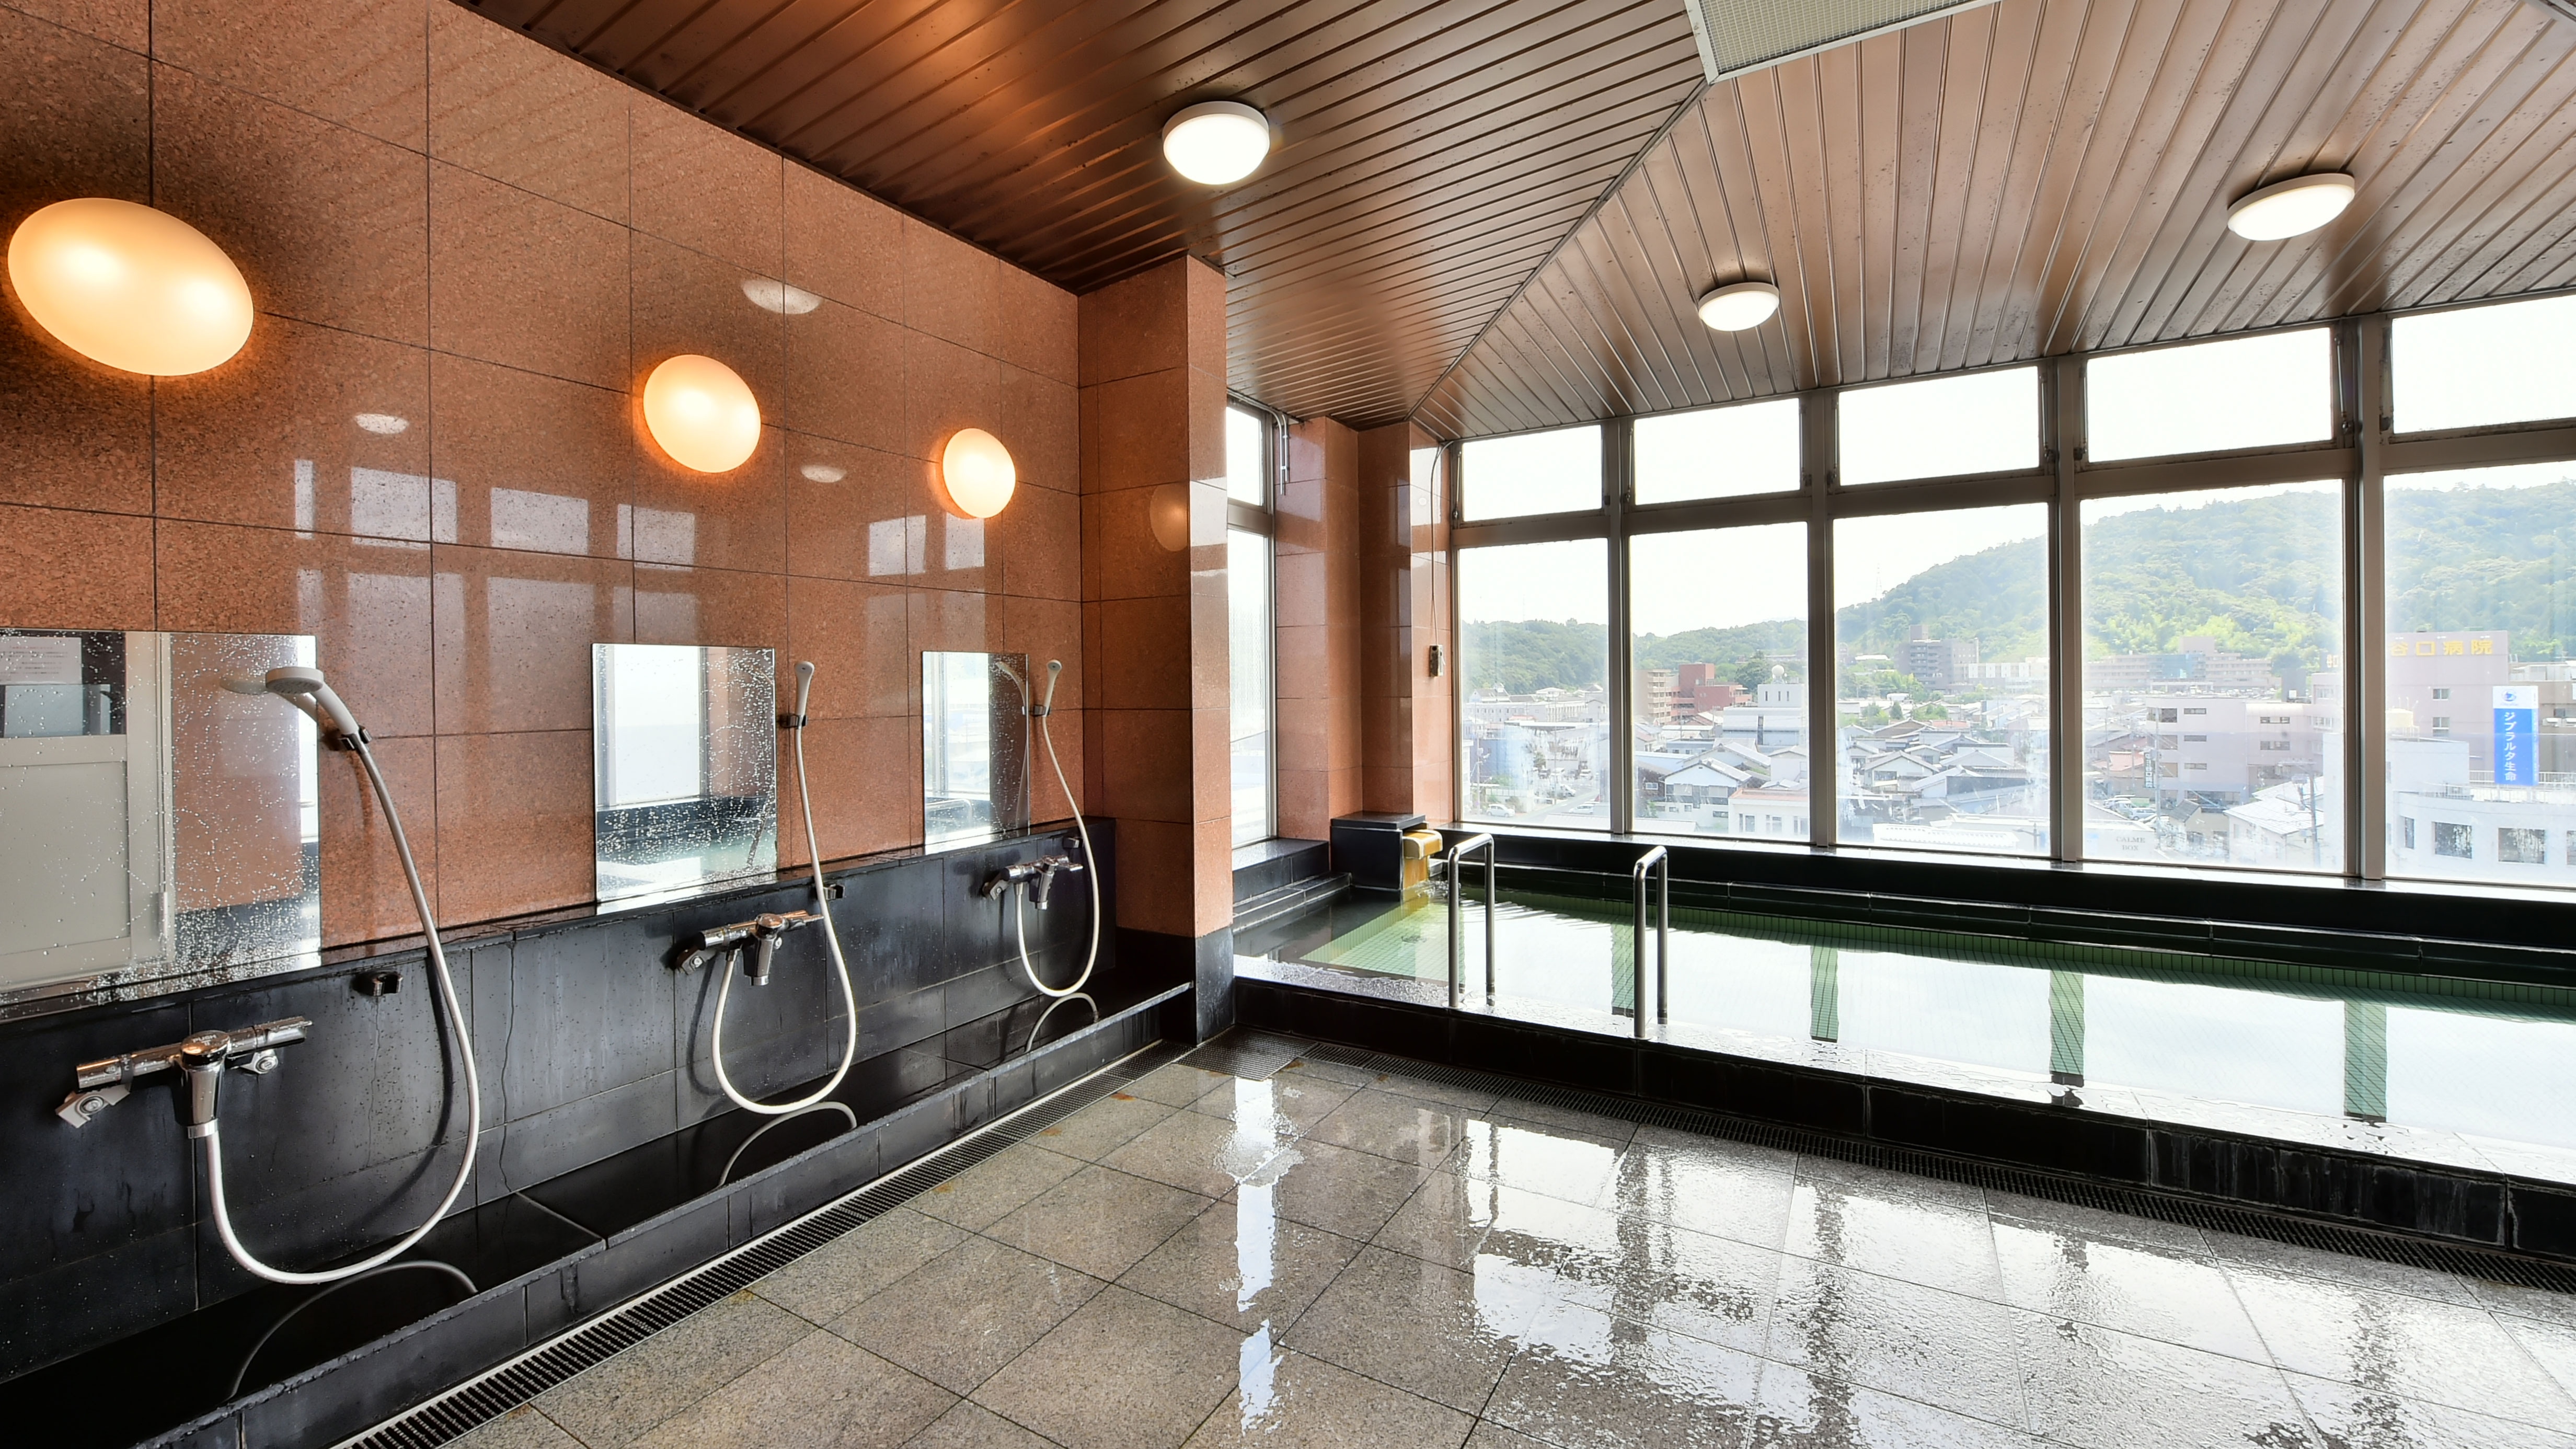 Overlooking Kurayoshi City! At night, you can see the small night view of Kurayoshi Station below. In the morning, you can take a bath while basking in the morning sun.